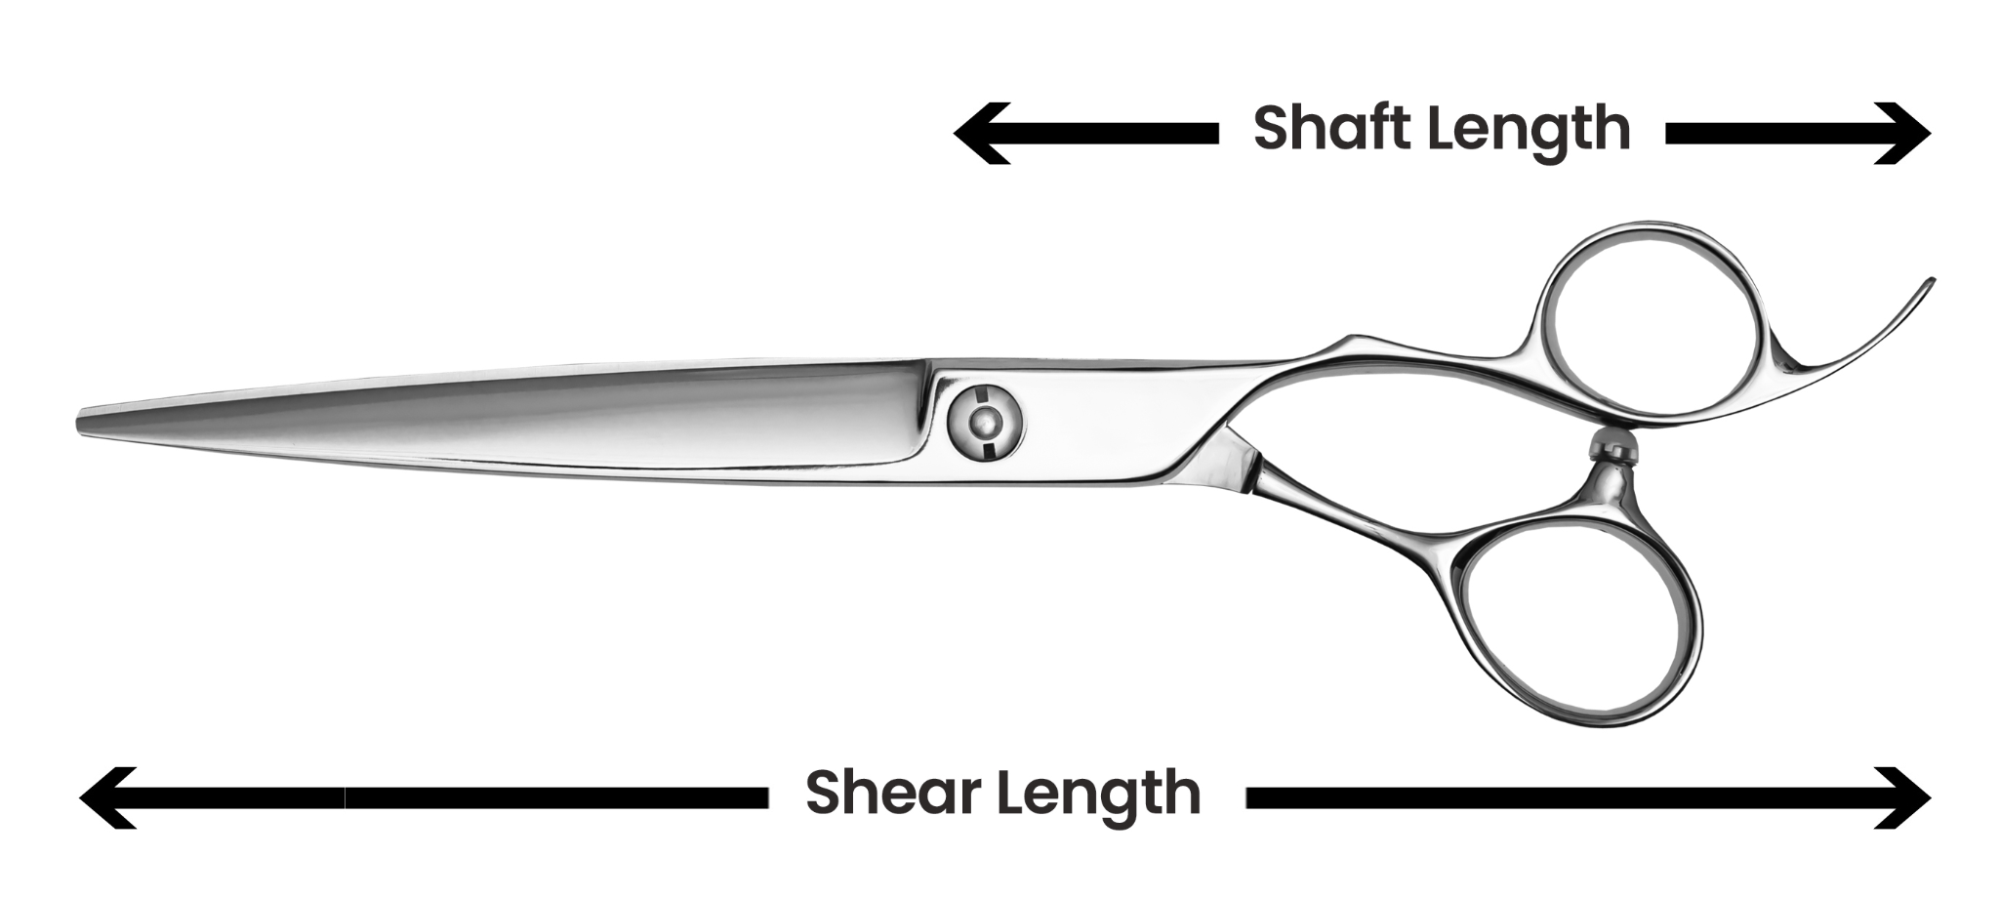 parts of a pair of scissors shaft